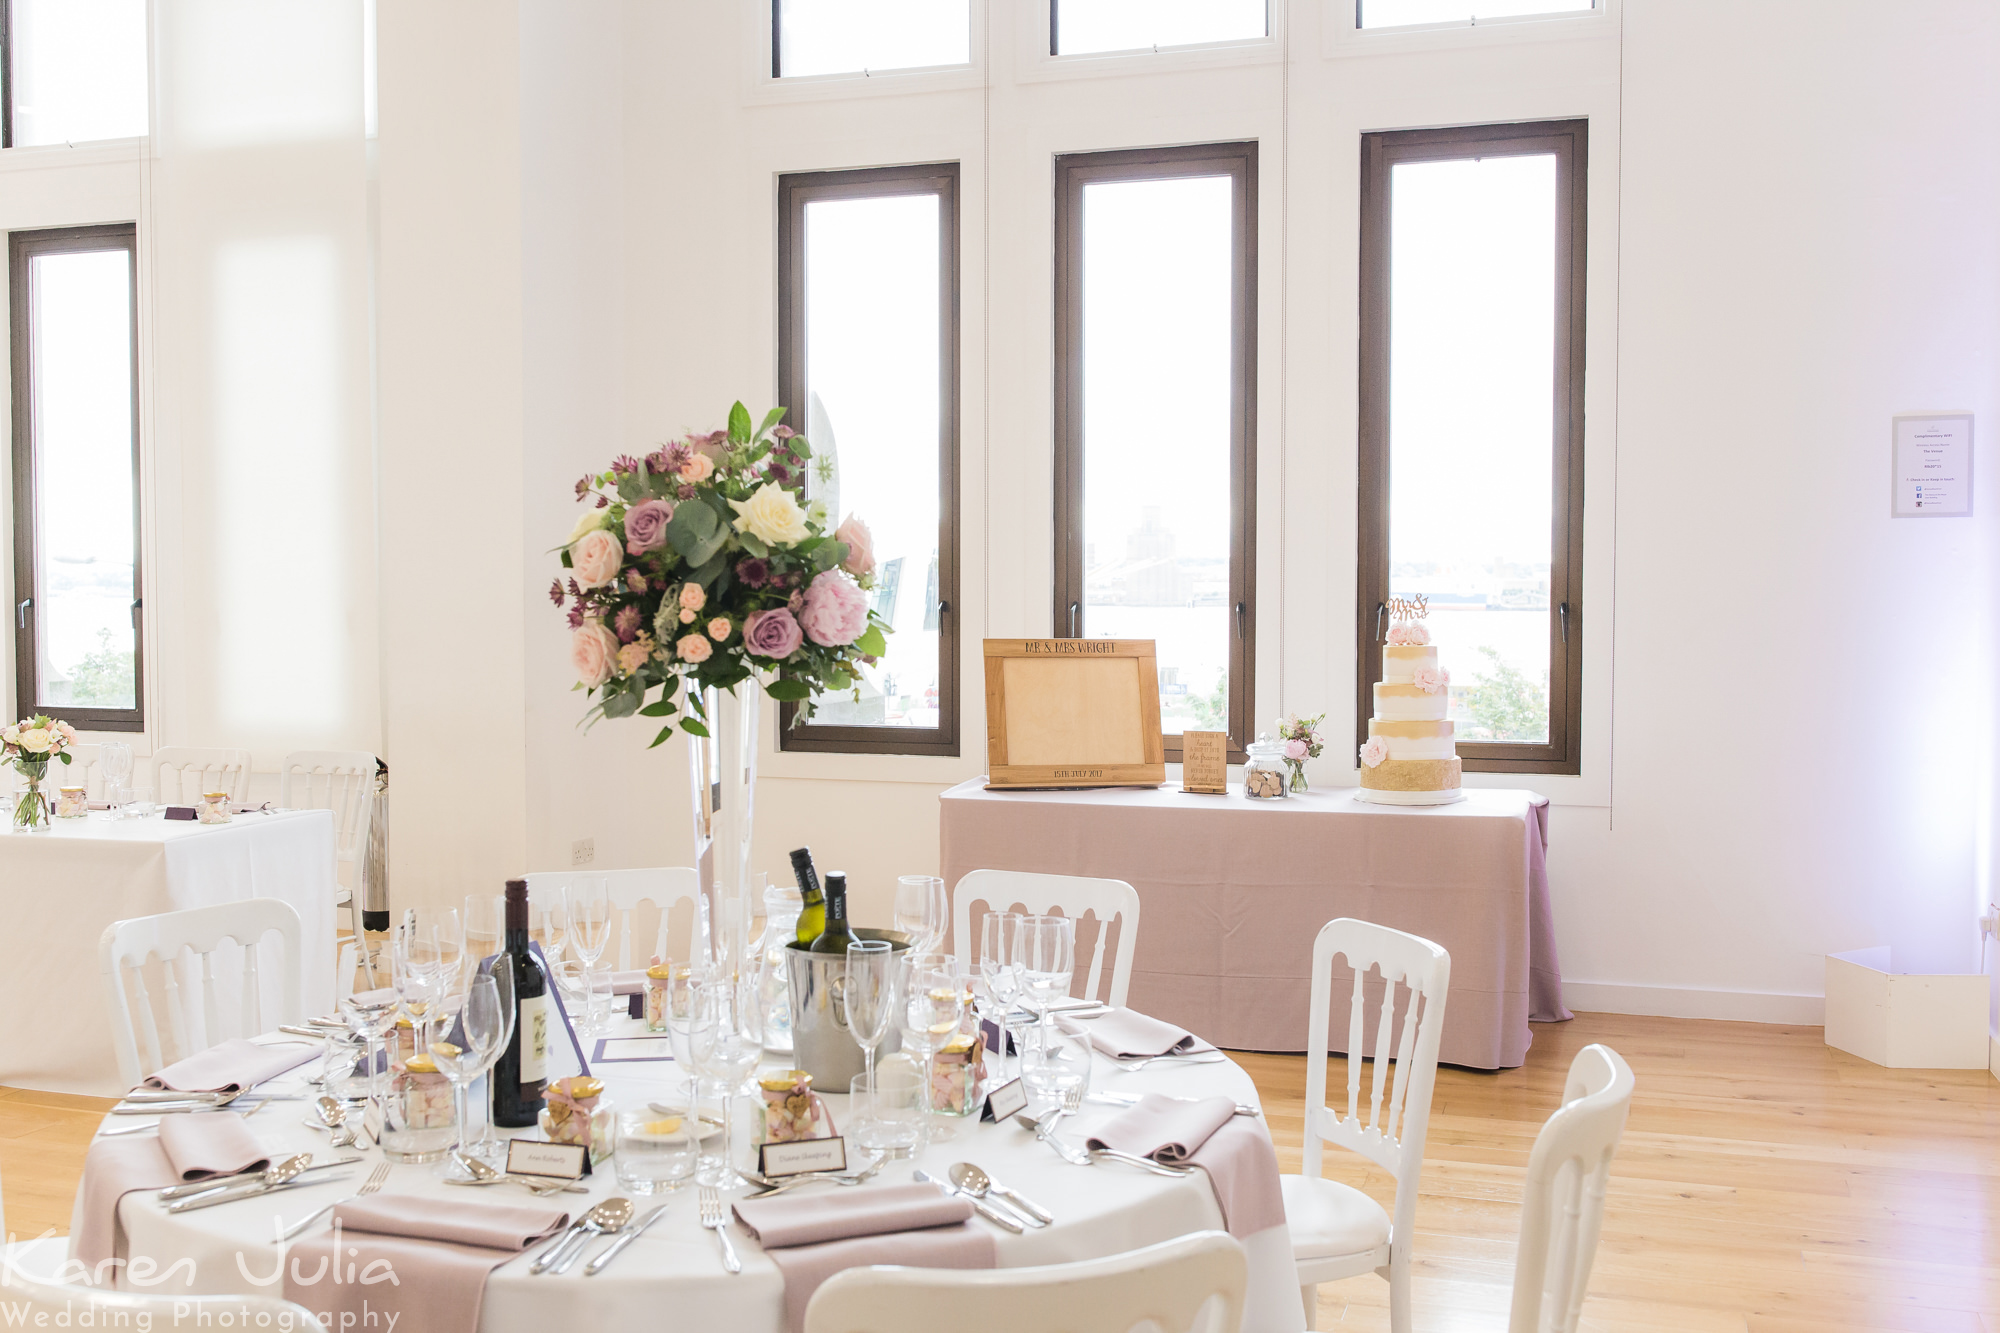 wedding breakfast room styling at the Royal Liver building